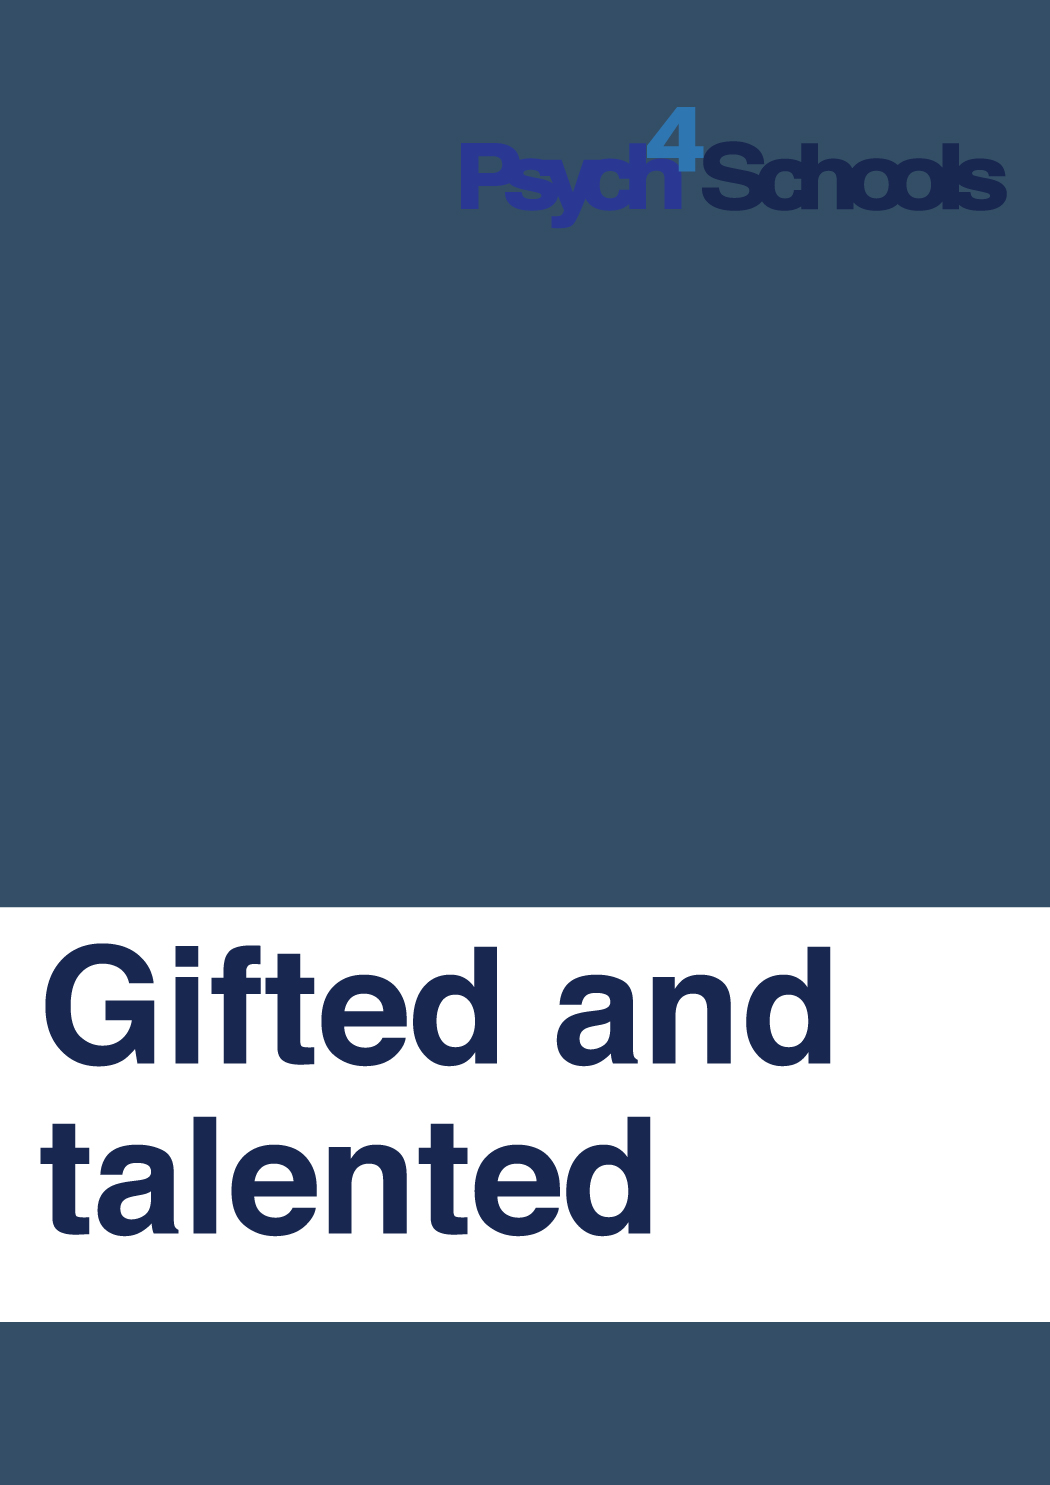 Gifted and talented